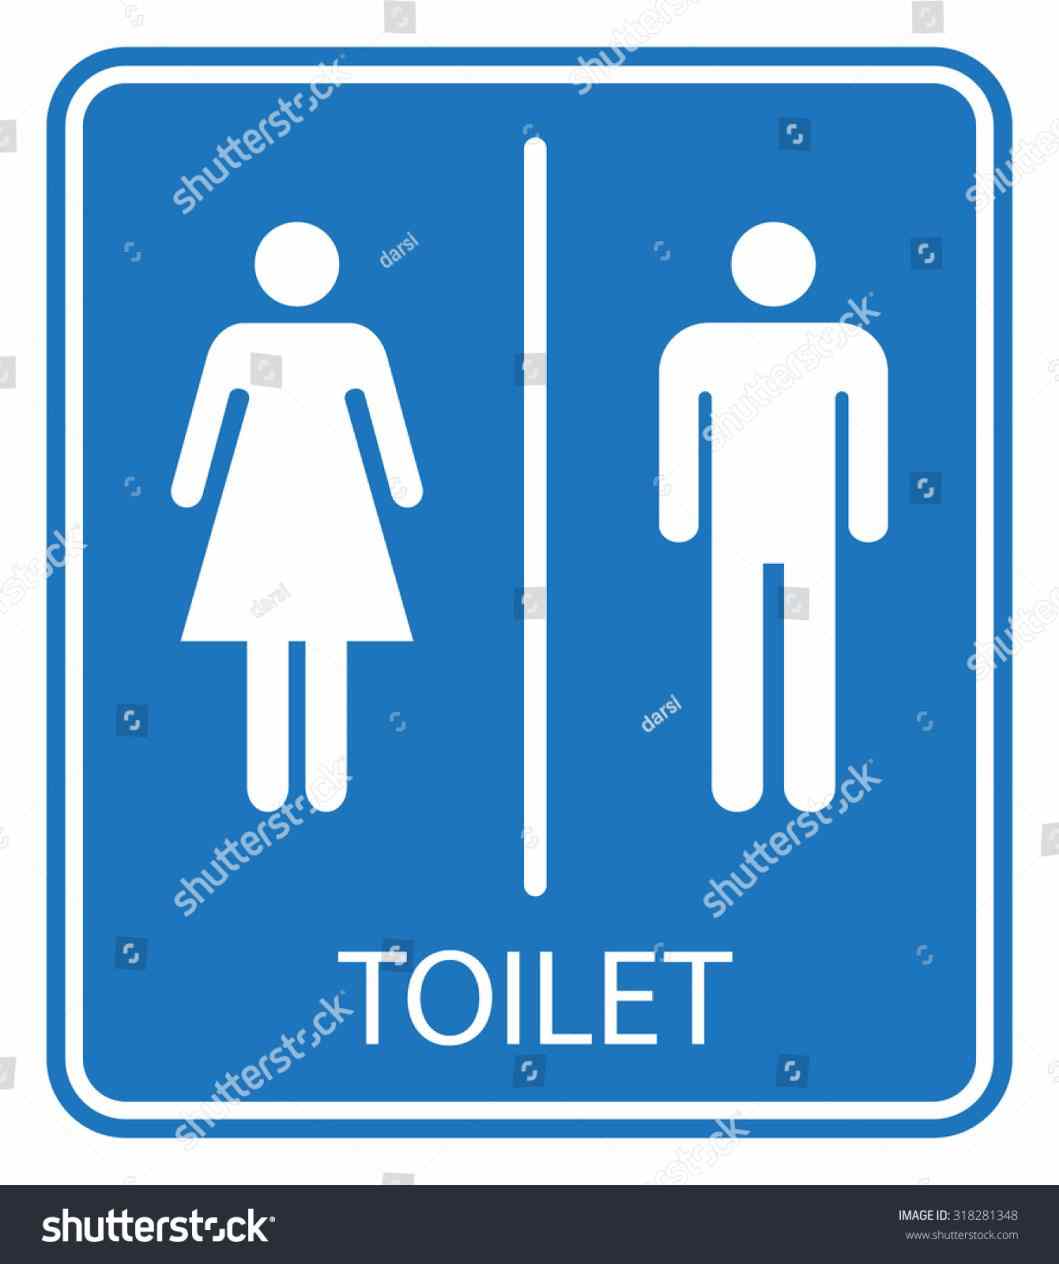 Restroom Clipart | Free download on ClipArtMag Man And Woman Bathroom Symbol